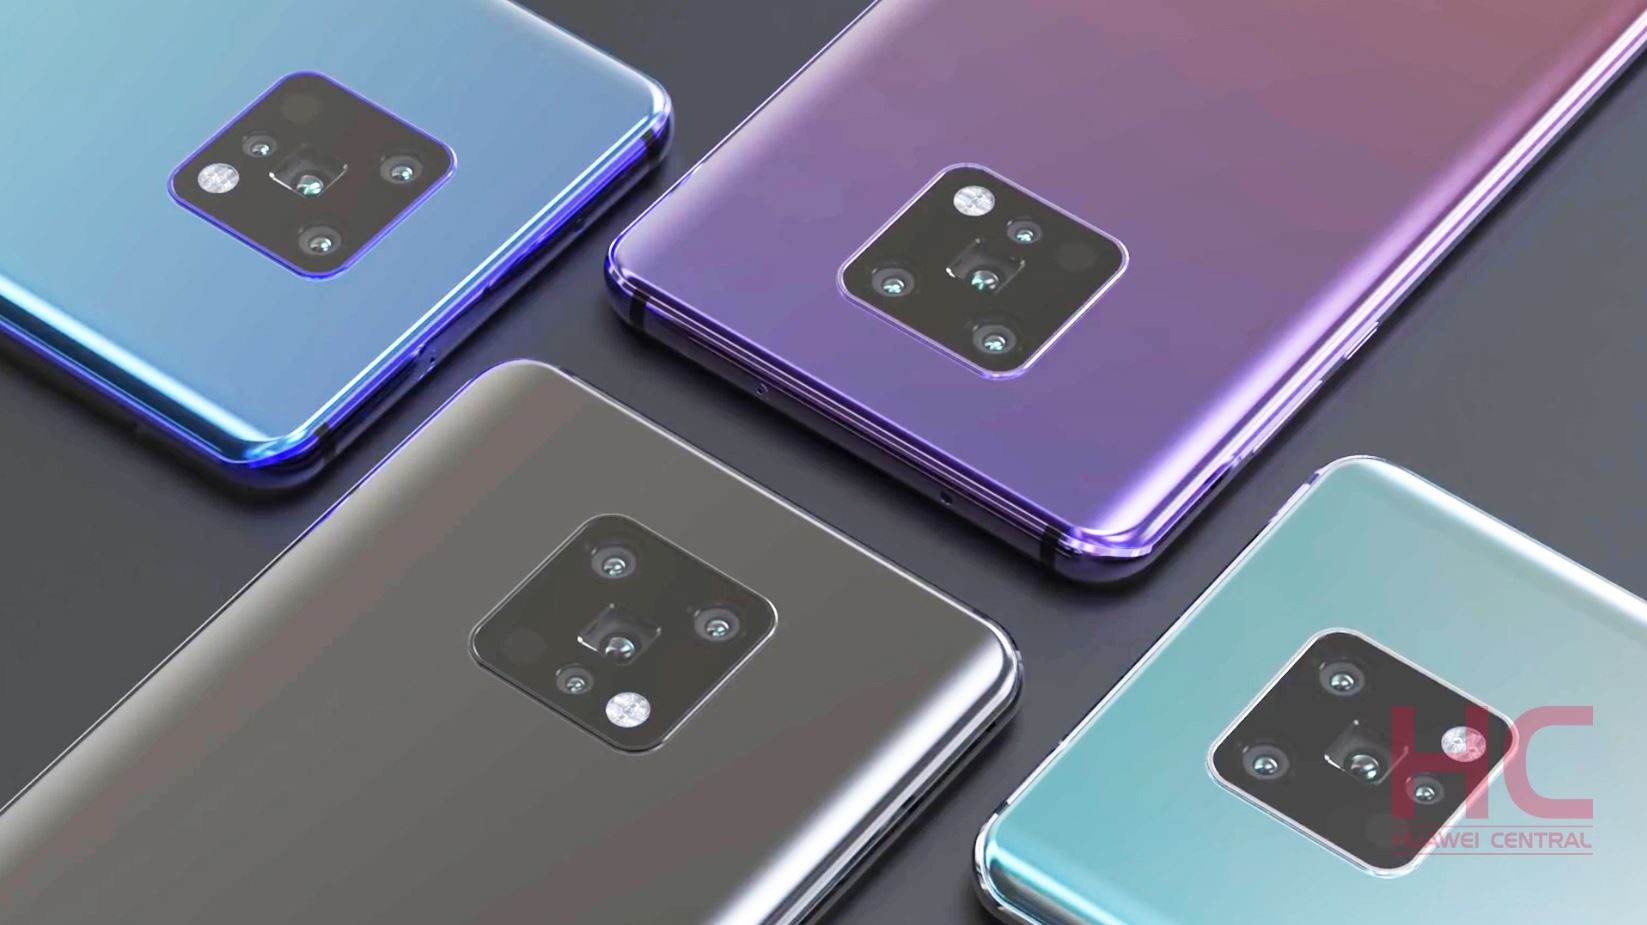 Alleged renders of the Huawei Mate 30 Pro leaks today﻿